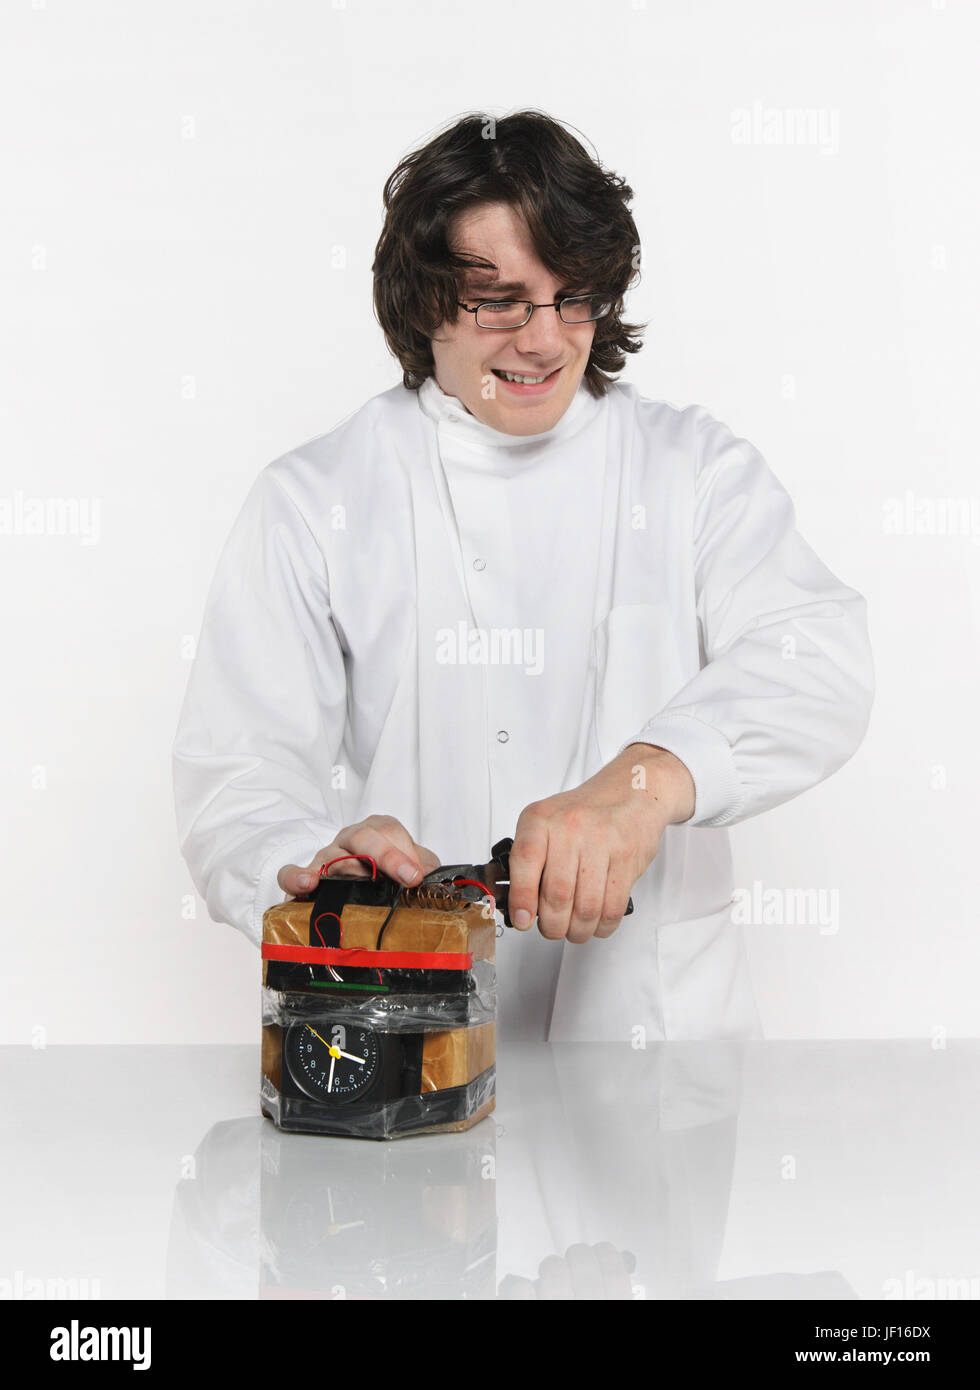 A young man painfully defuses a bomb cutting through the red wire Stock Photo